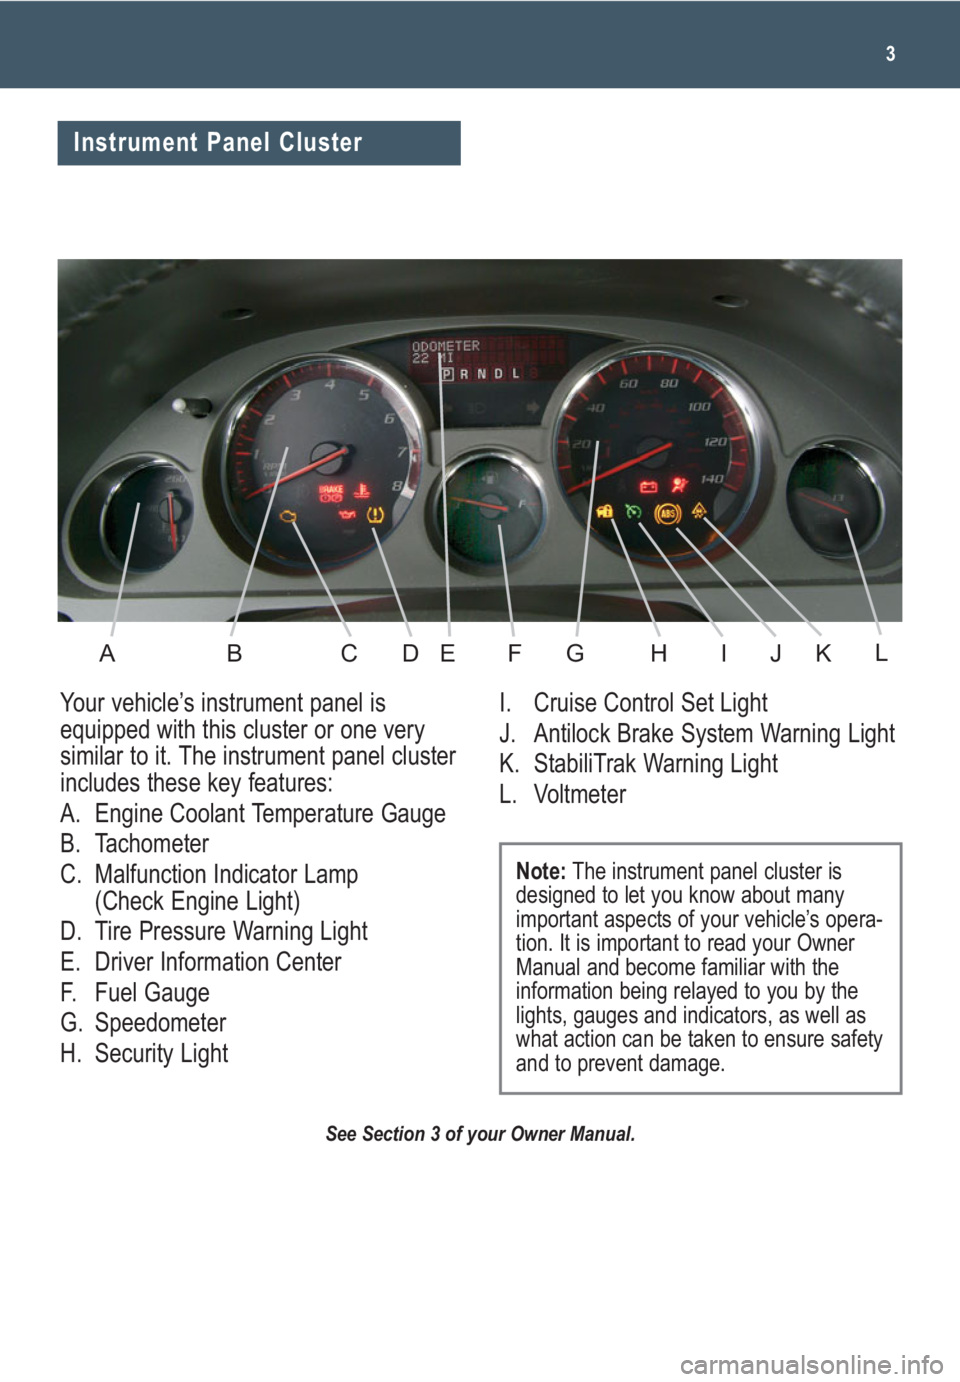 GMC ACADIA 2008  Get To Know Guide 3
See Section 3 of your Owner Manual.
Your vehicle’s instrument panel is
equipped with this cluster or one very
similar to it. The instrument panel cluster
includes these key features:
A. Engine Coo